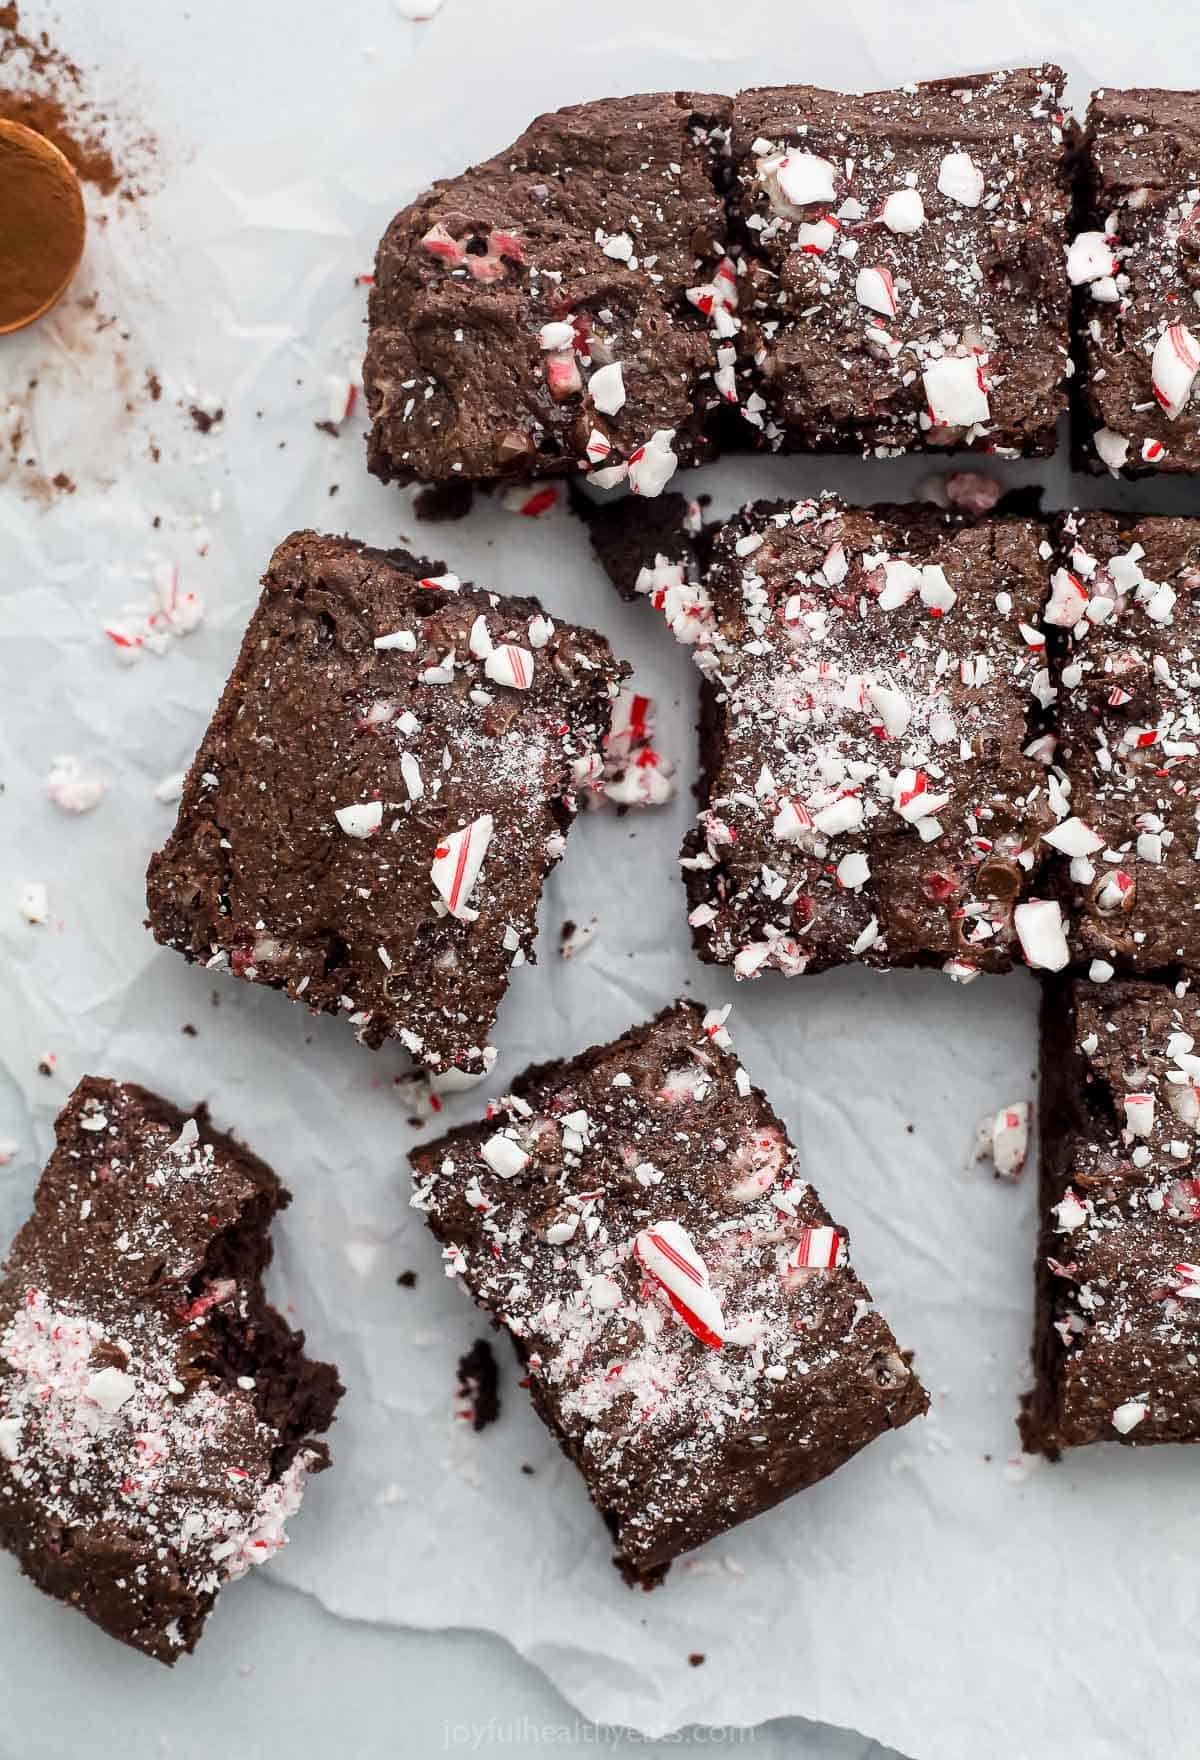 Nine homemade candy cane brownies on a countertop with a small amount of cinnamon beside them